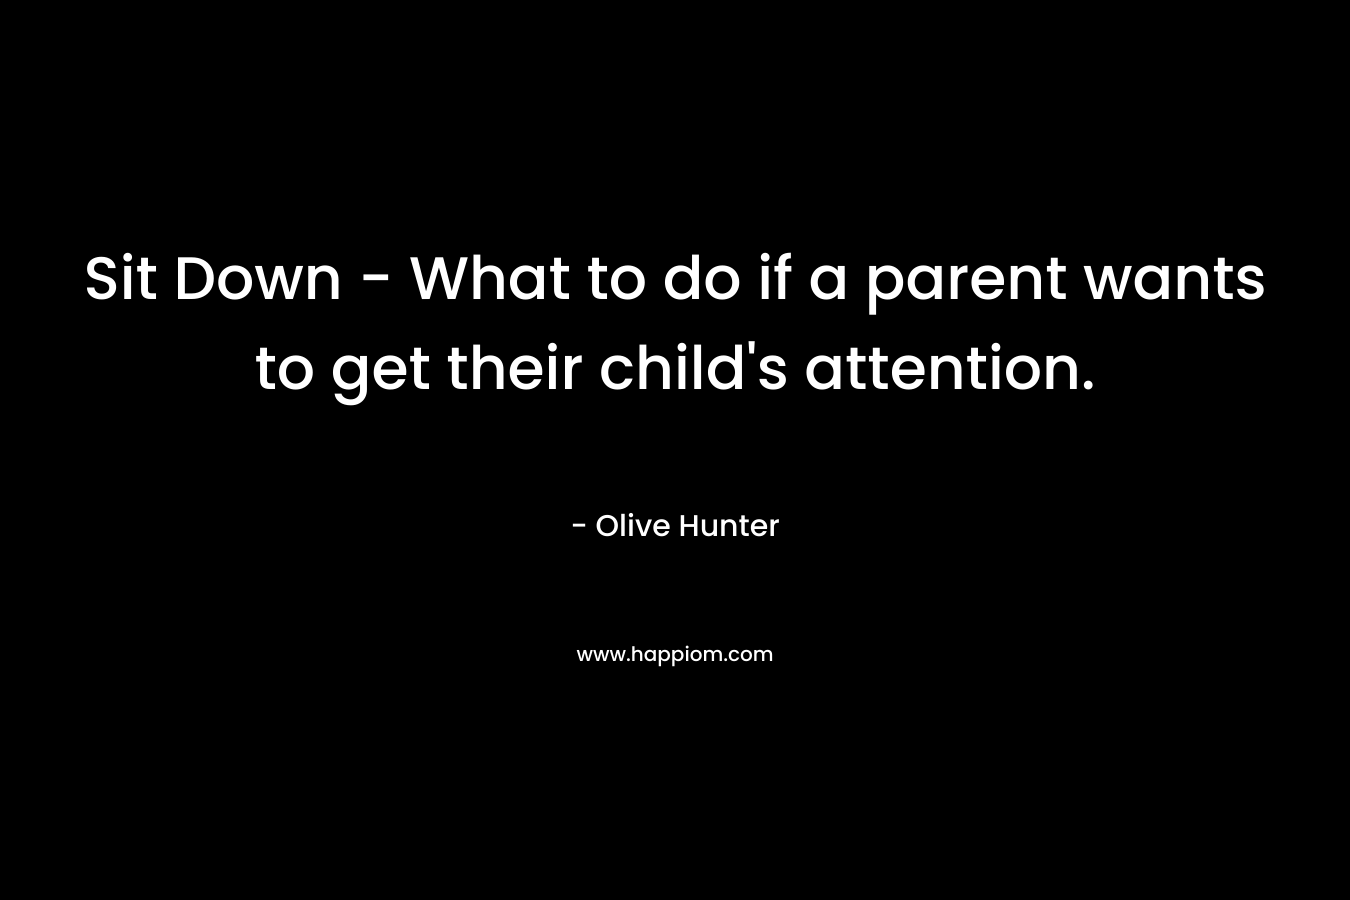 Sit Down - What to do if a parent wants to get their child's attention.